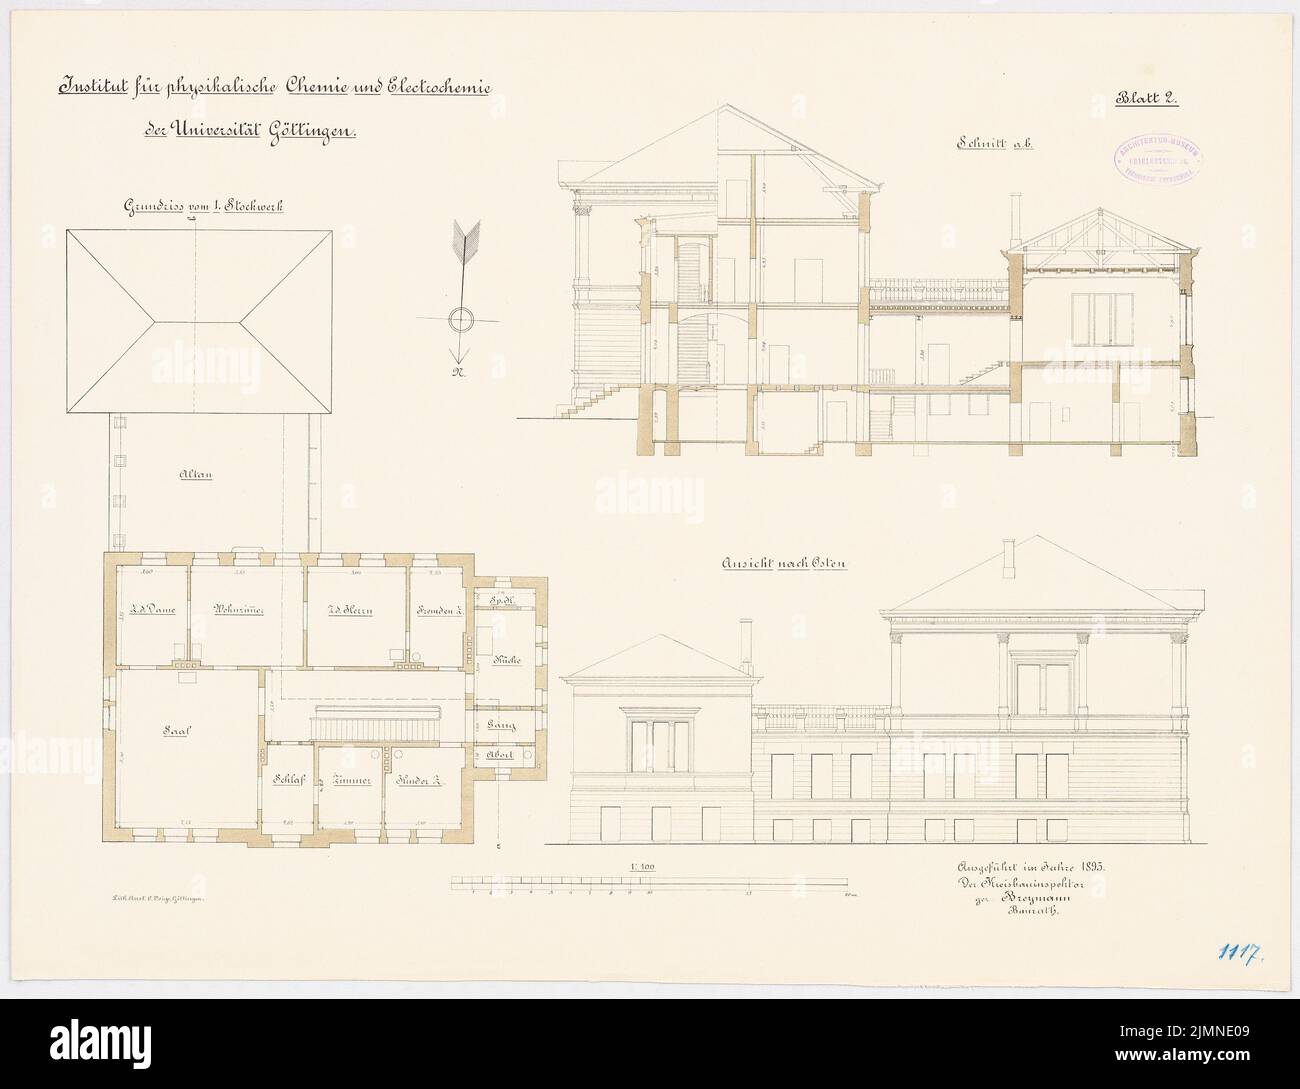 Unknown architect, Institute for Physical Chemistry and Electrochemistry at the University of Göttingen (1895): floor plan upper floor, open east view, cross -section 1: 100. Lithograph, 50.4 x 65.5 cm (including scan edges) Stock Photo